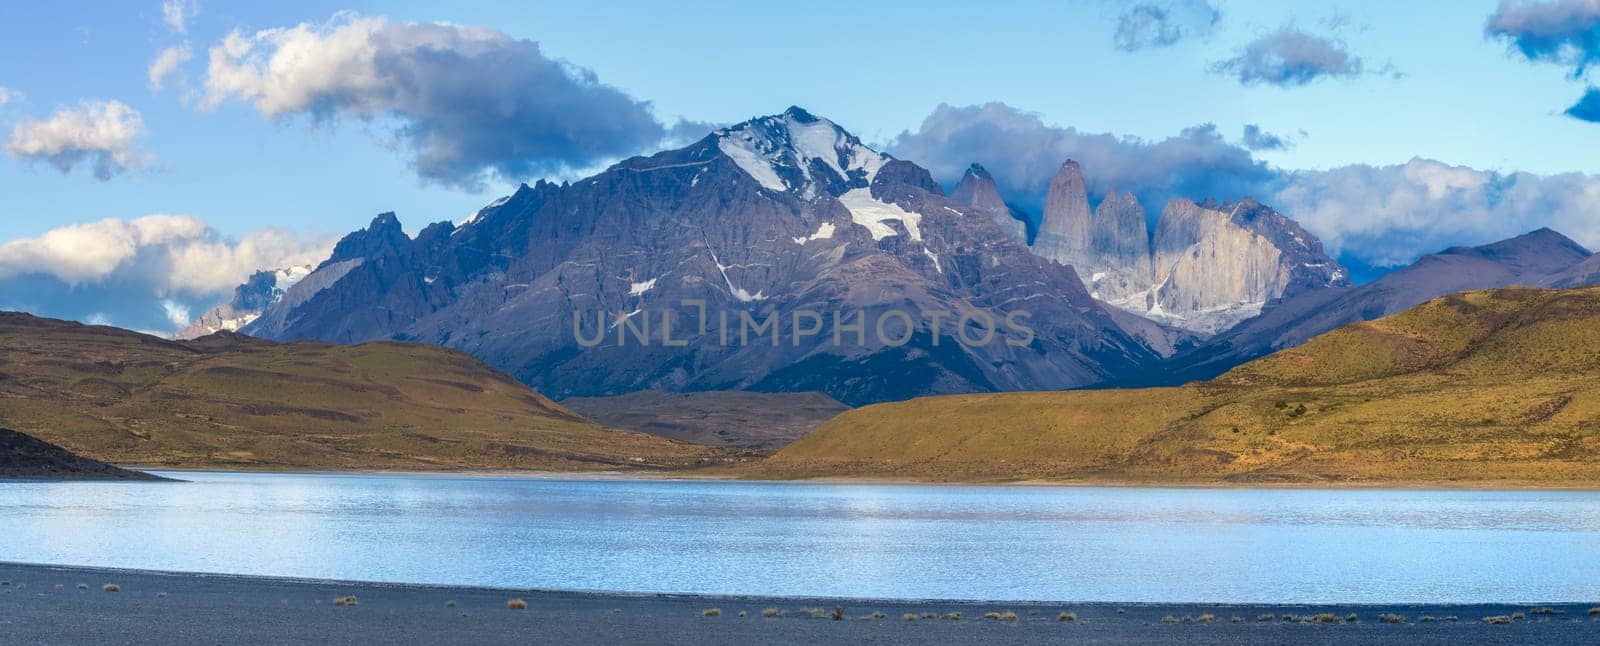 Serene lake with mountain backdrop captured in a panoramic view during golden hour, Torres del Paine